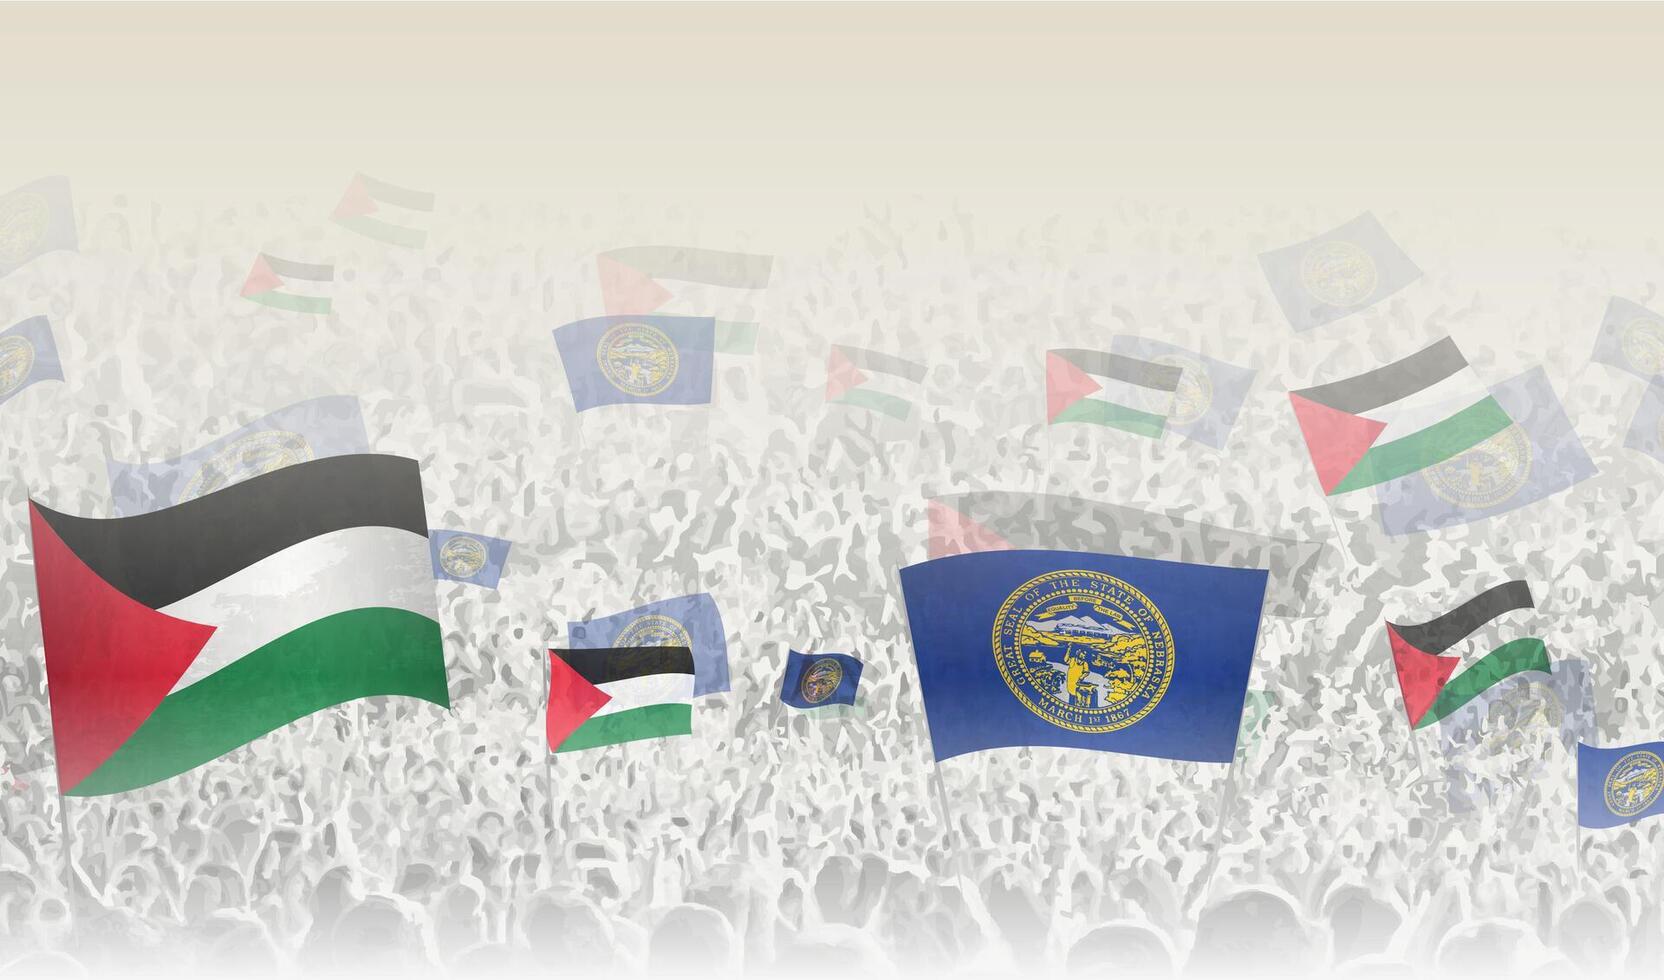 Palestine and Nebraska flags in a crowd of cheering people. vector